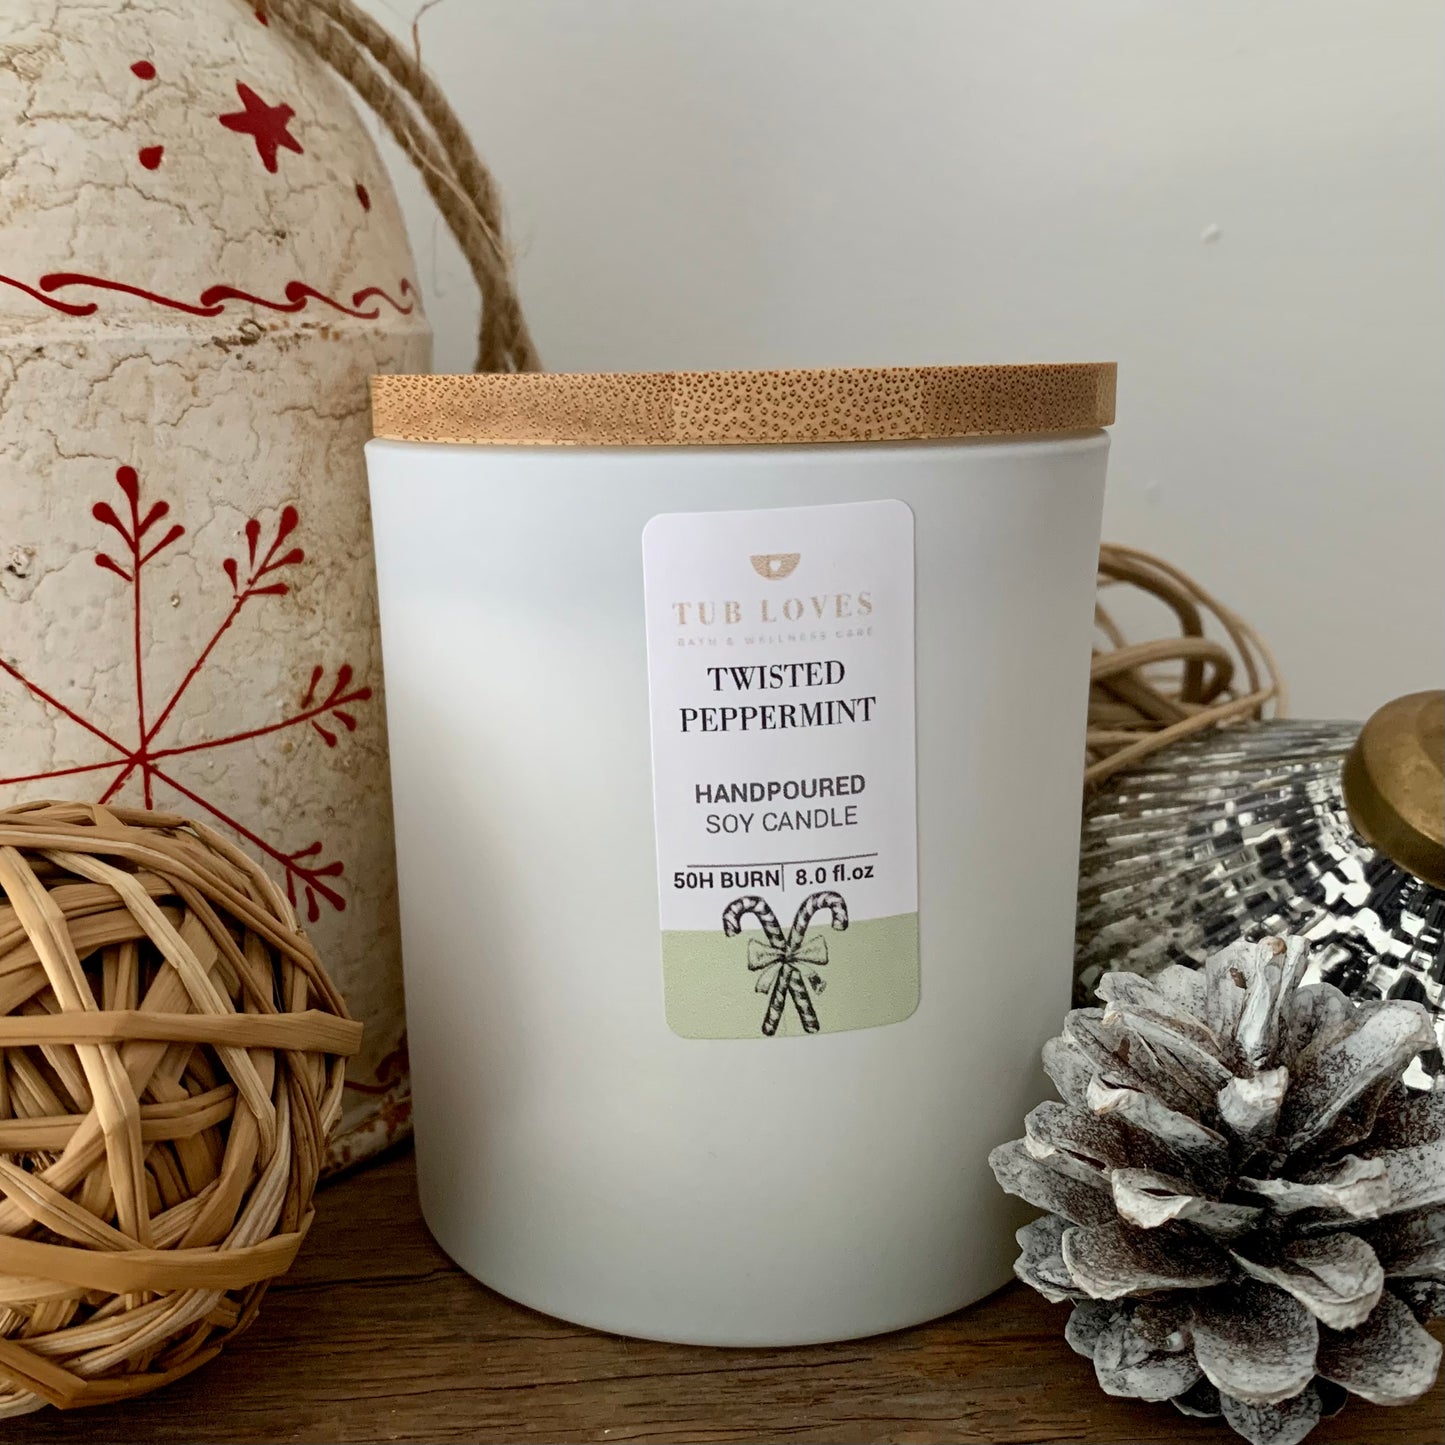 Twisted Peppermint Soy Candle